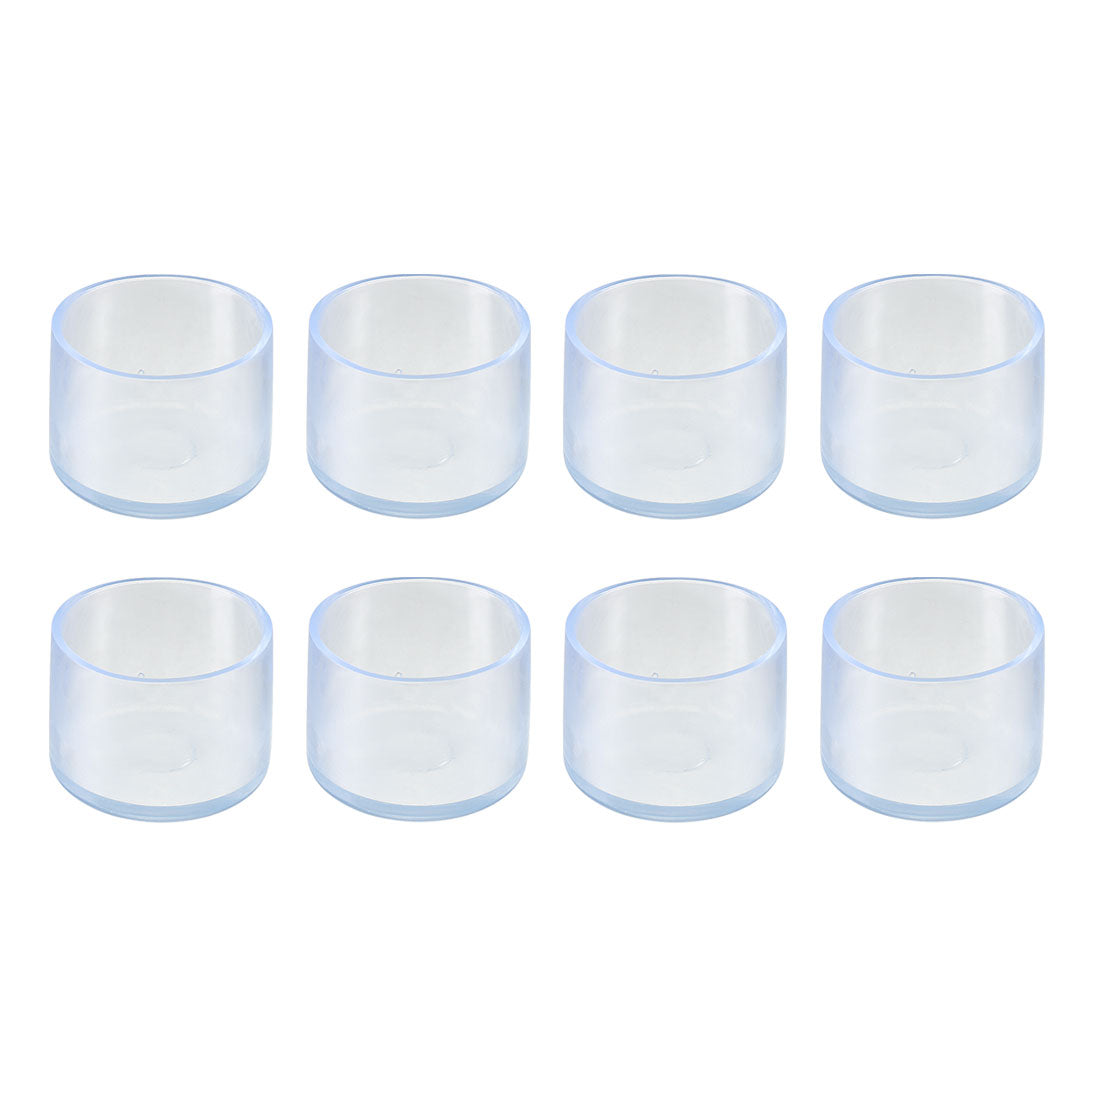 uxcell Uxcell Clear PVC Chair Leg Caps End Tip Feet Cover Furniture Glide Floor Protector 8pcs 1.5" 38mm Inner Diameter, Reduce Noise Prevent Scratch